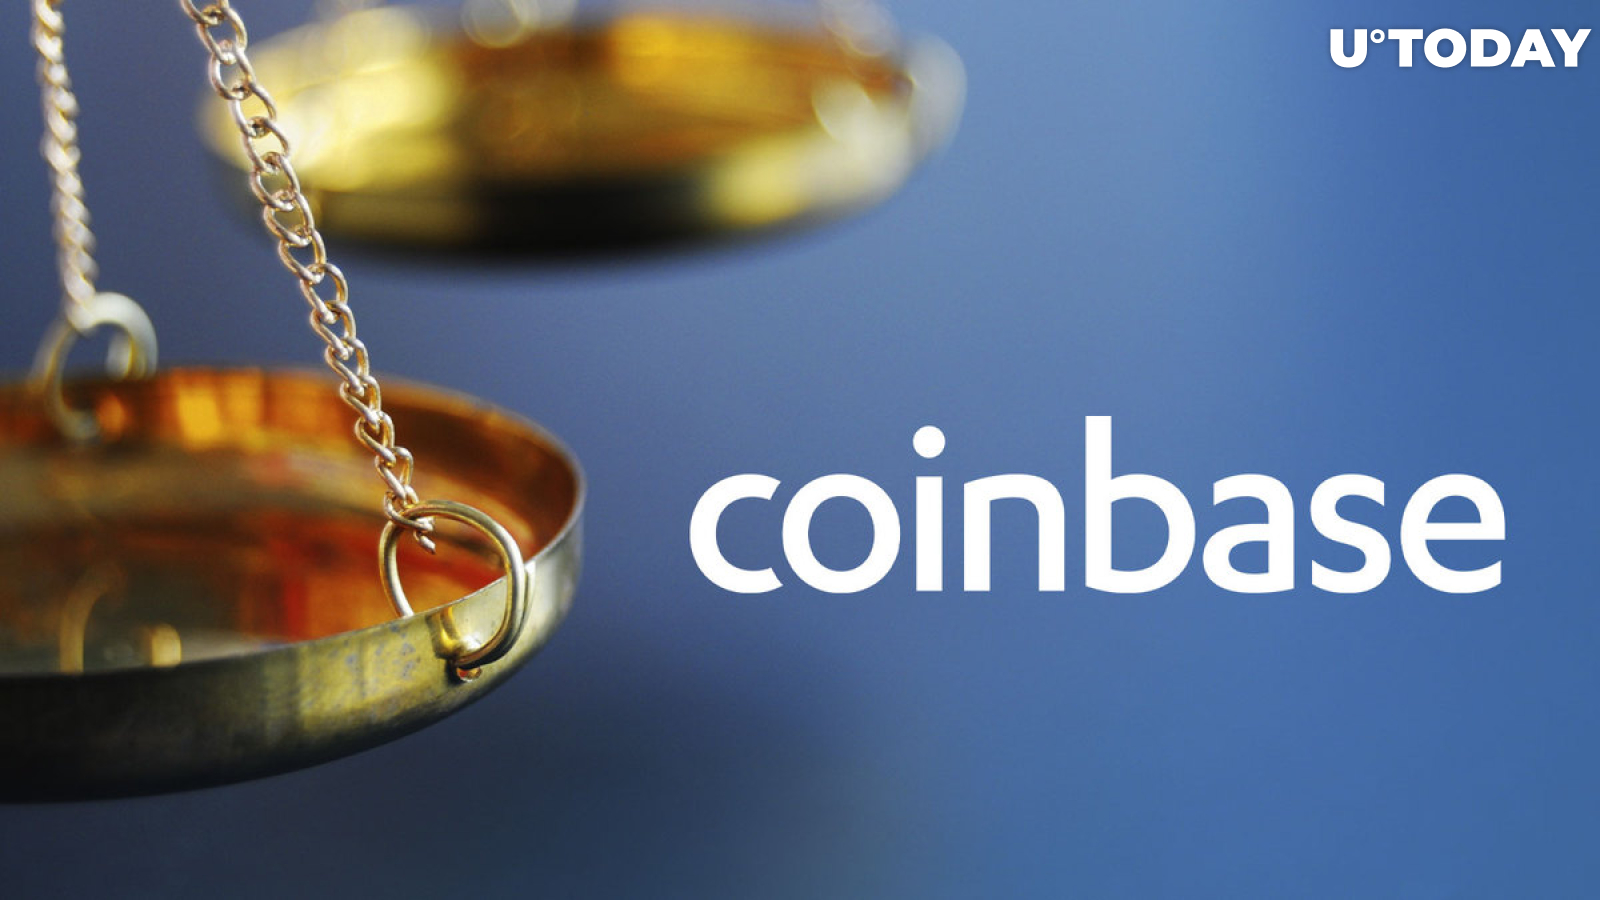 New Class Action Lawsuit Filed Against Coinbase, Here's Reason